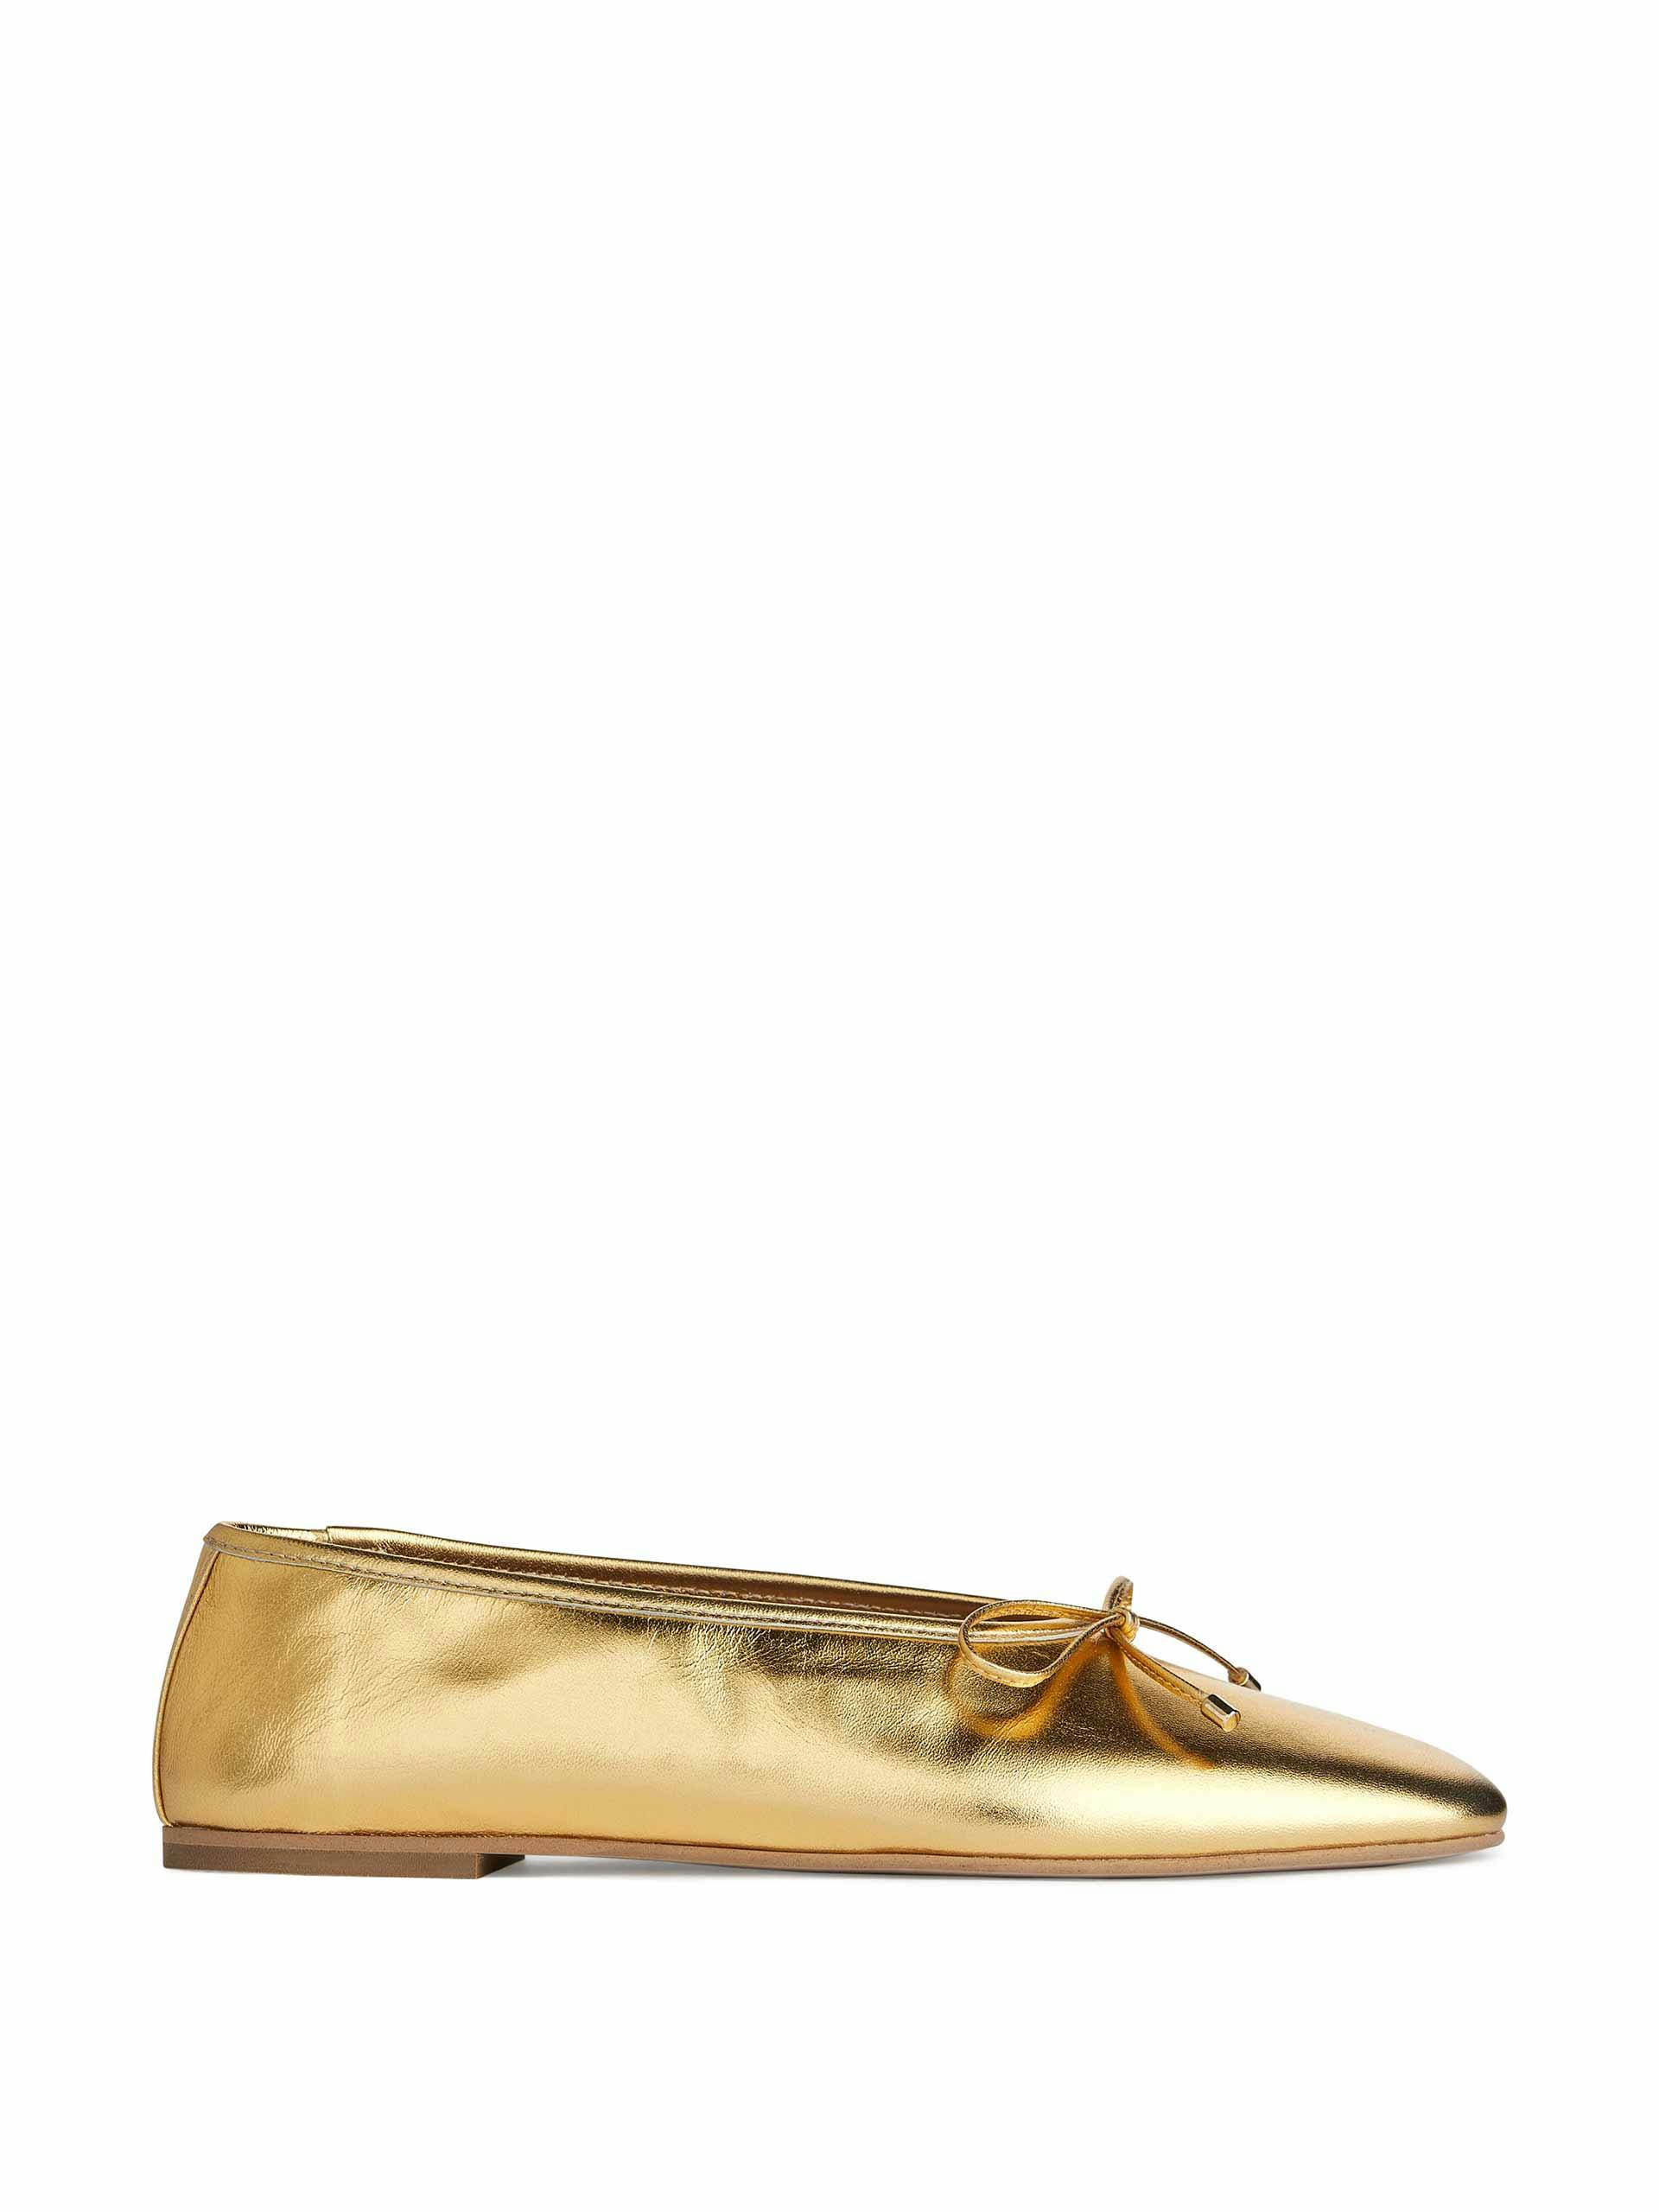 Gold leather ballerina pumps